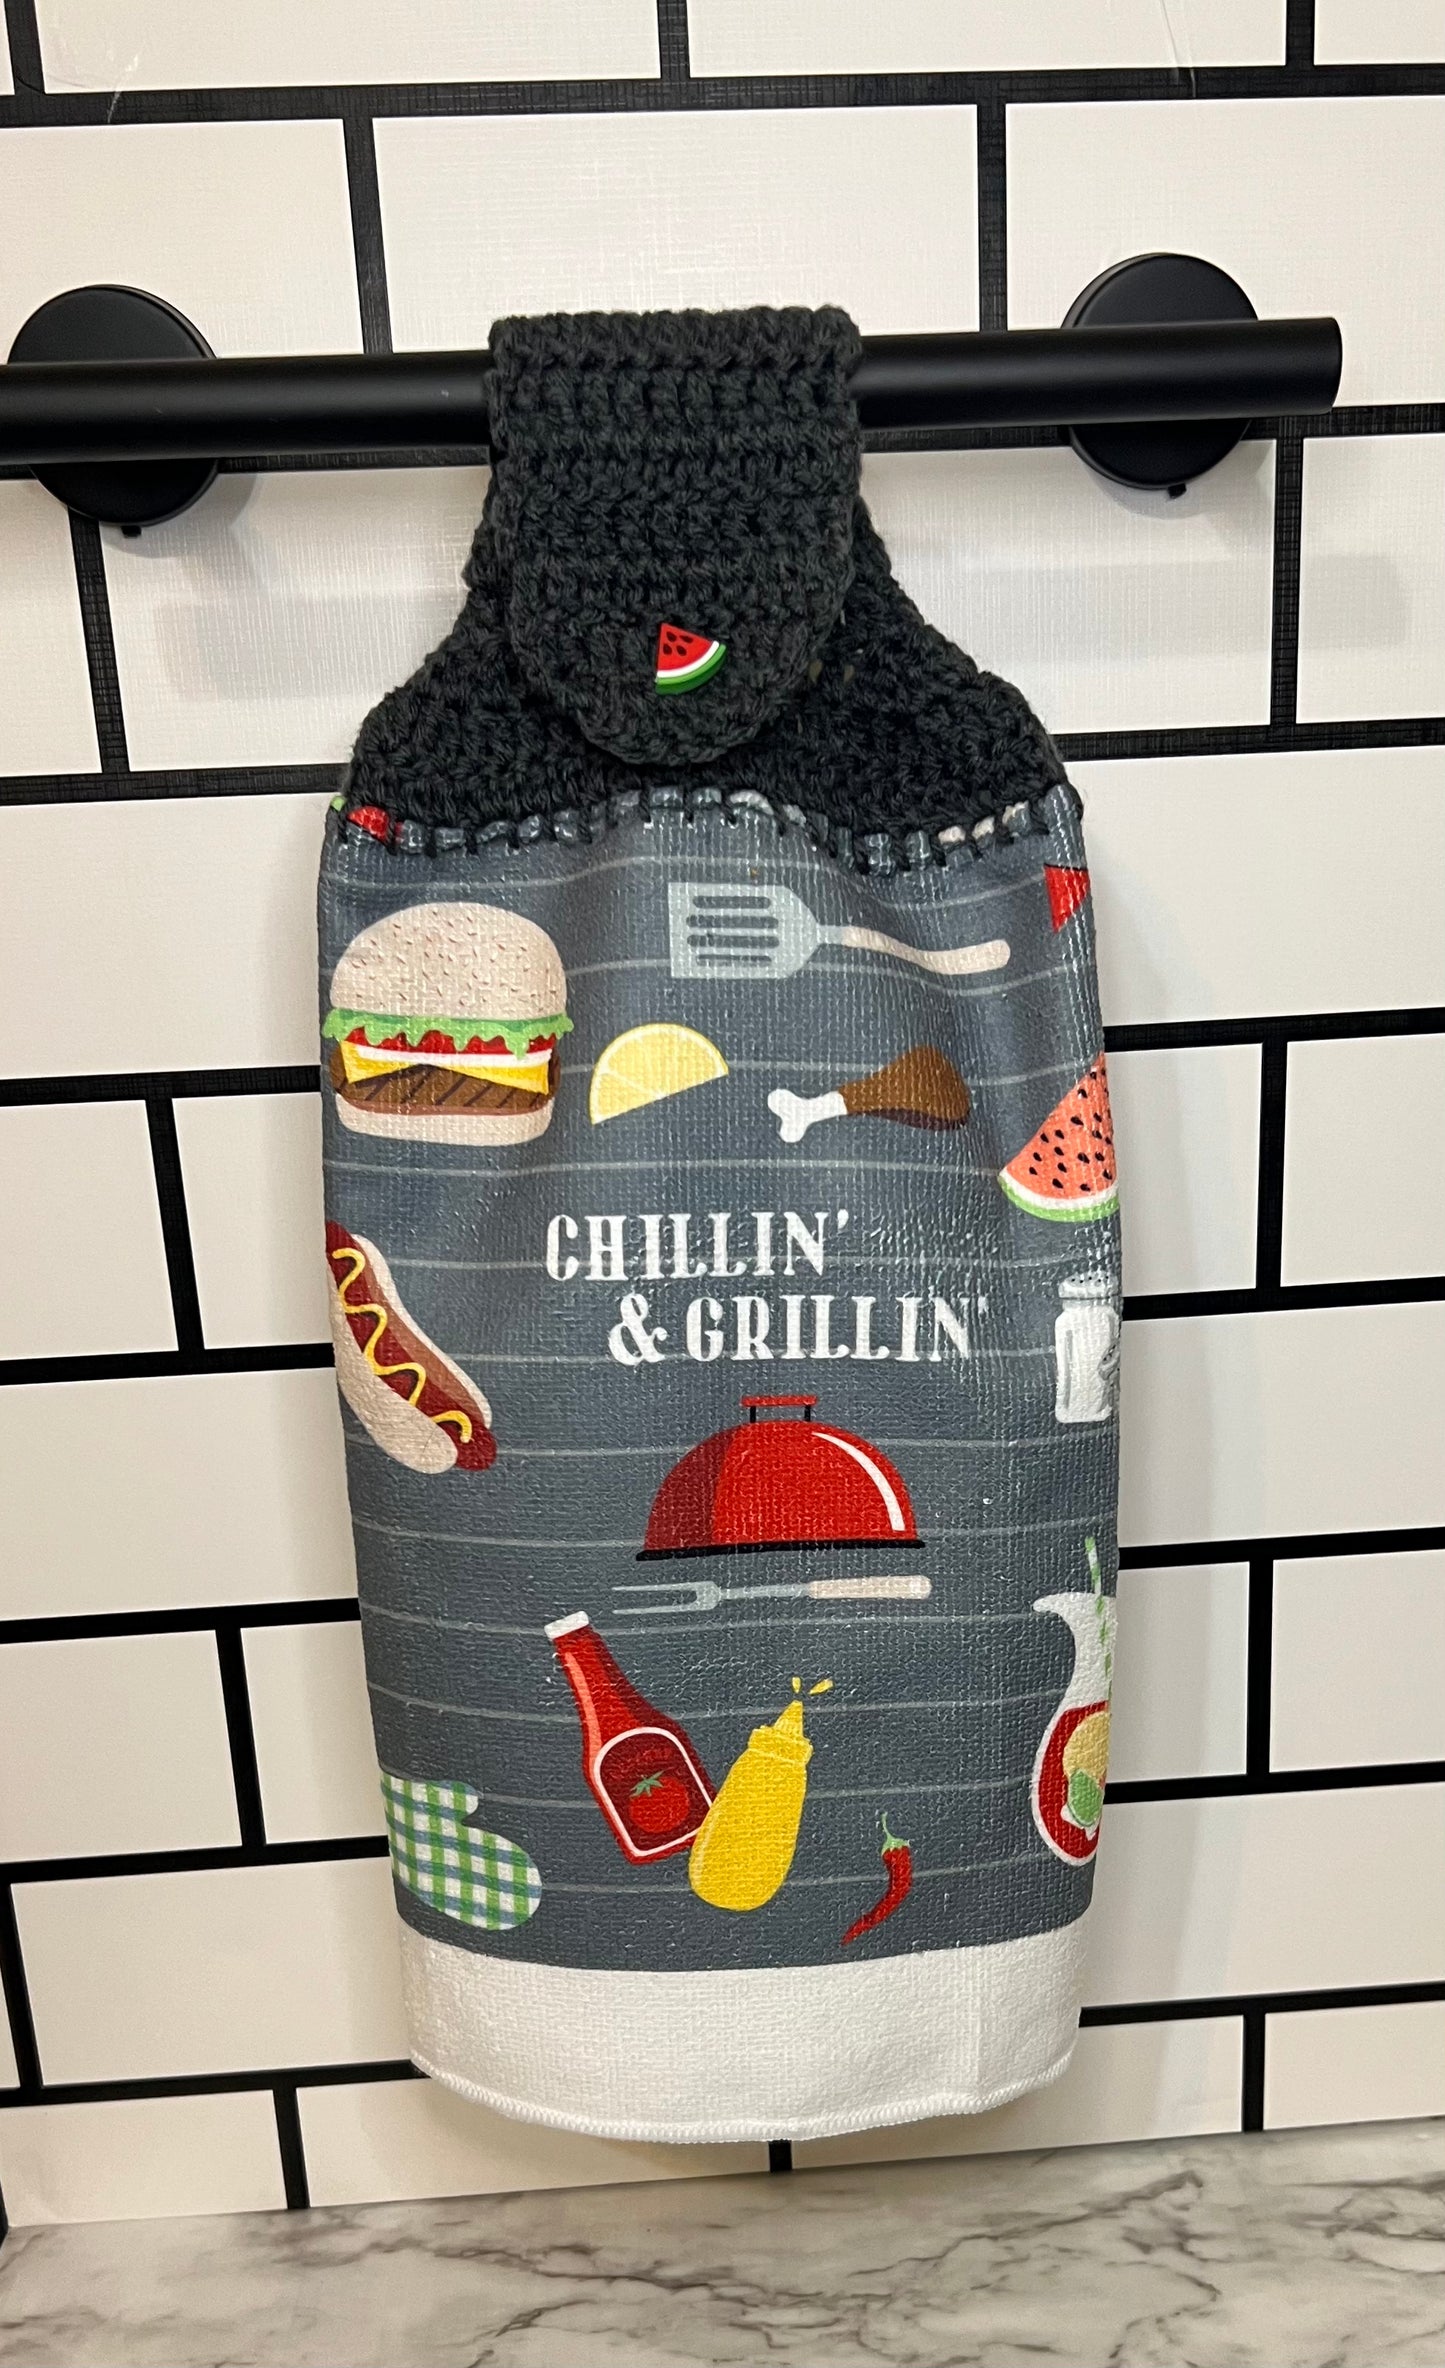 Chill n’ Grill